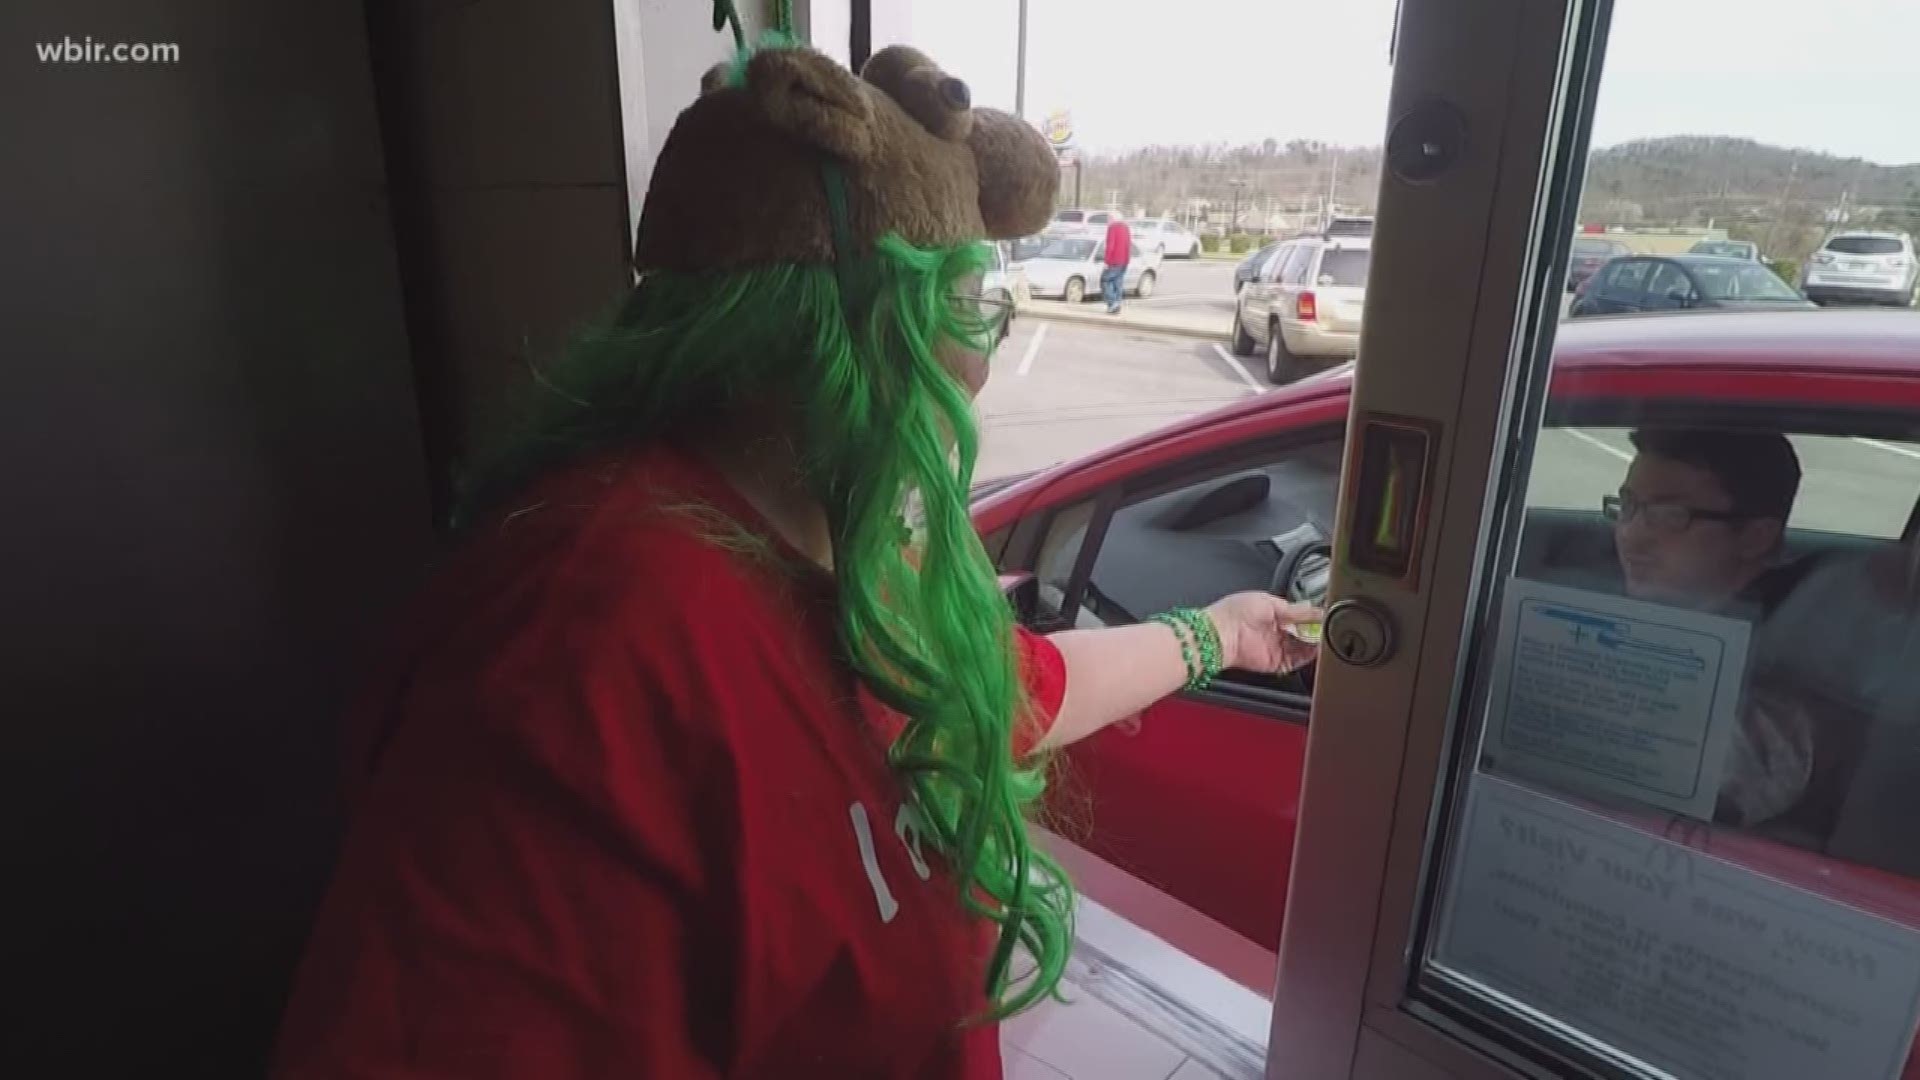 Customers will drive out of their way just to visit her at the drive-thru window.